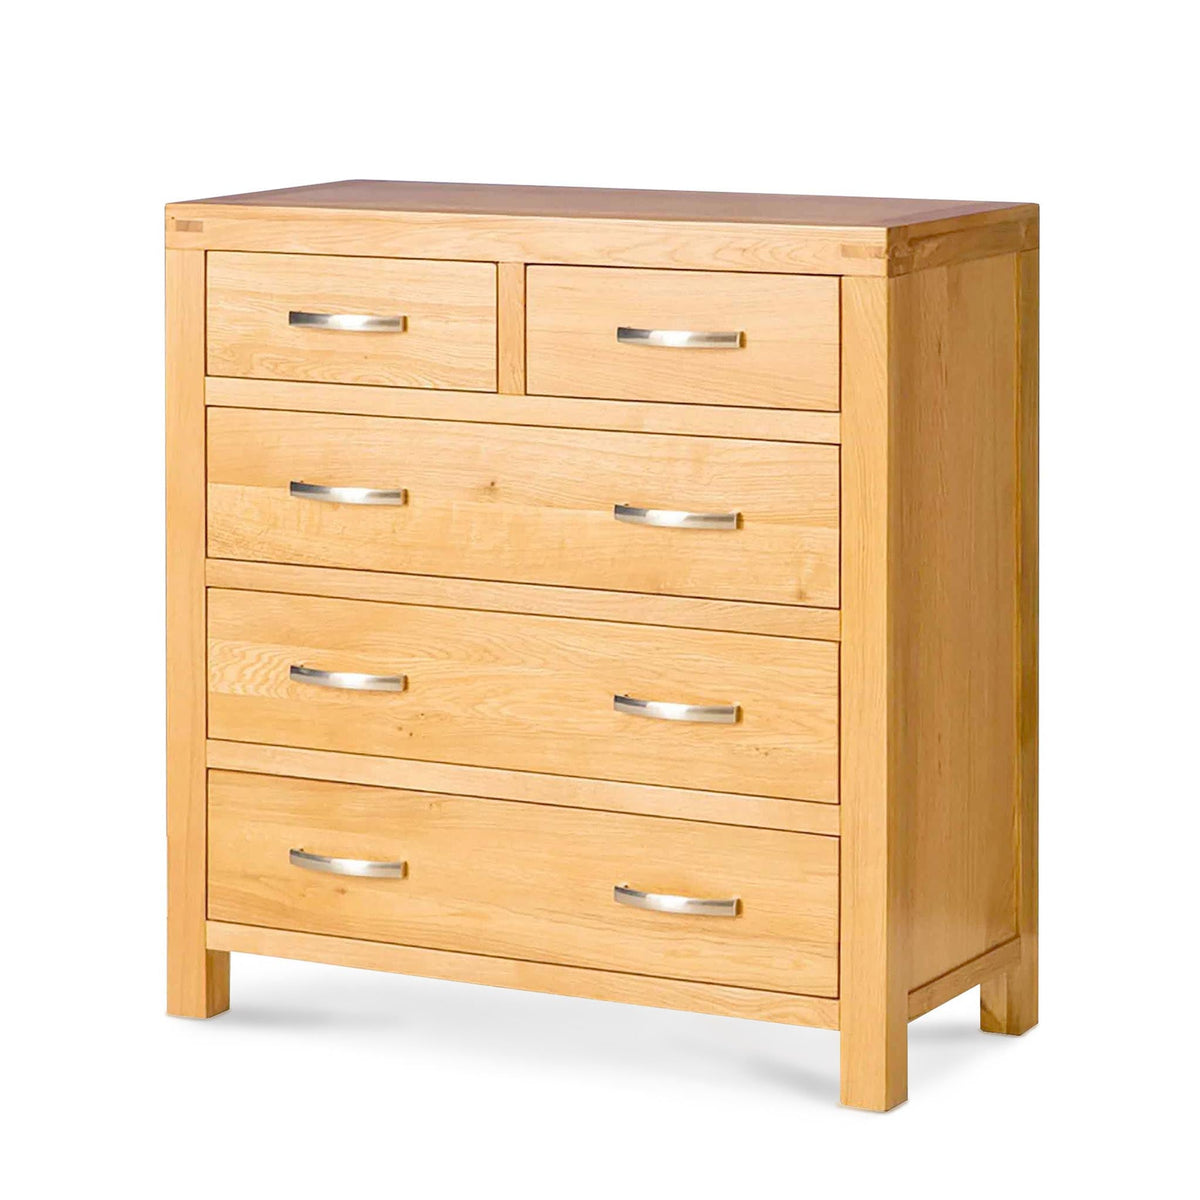 Abbey Light Oak Chest of Drawers - Side view